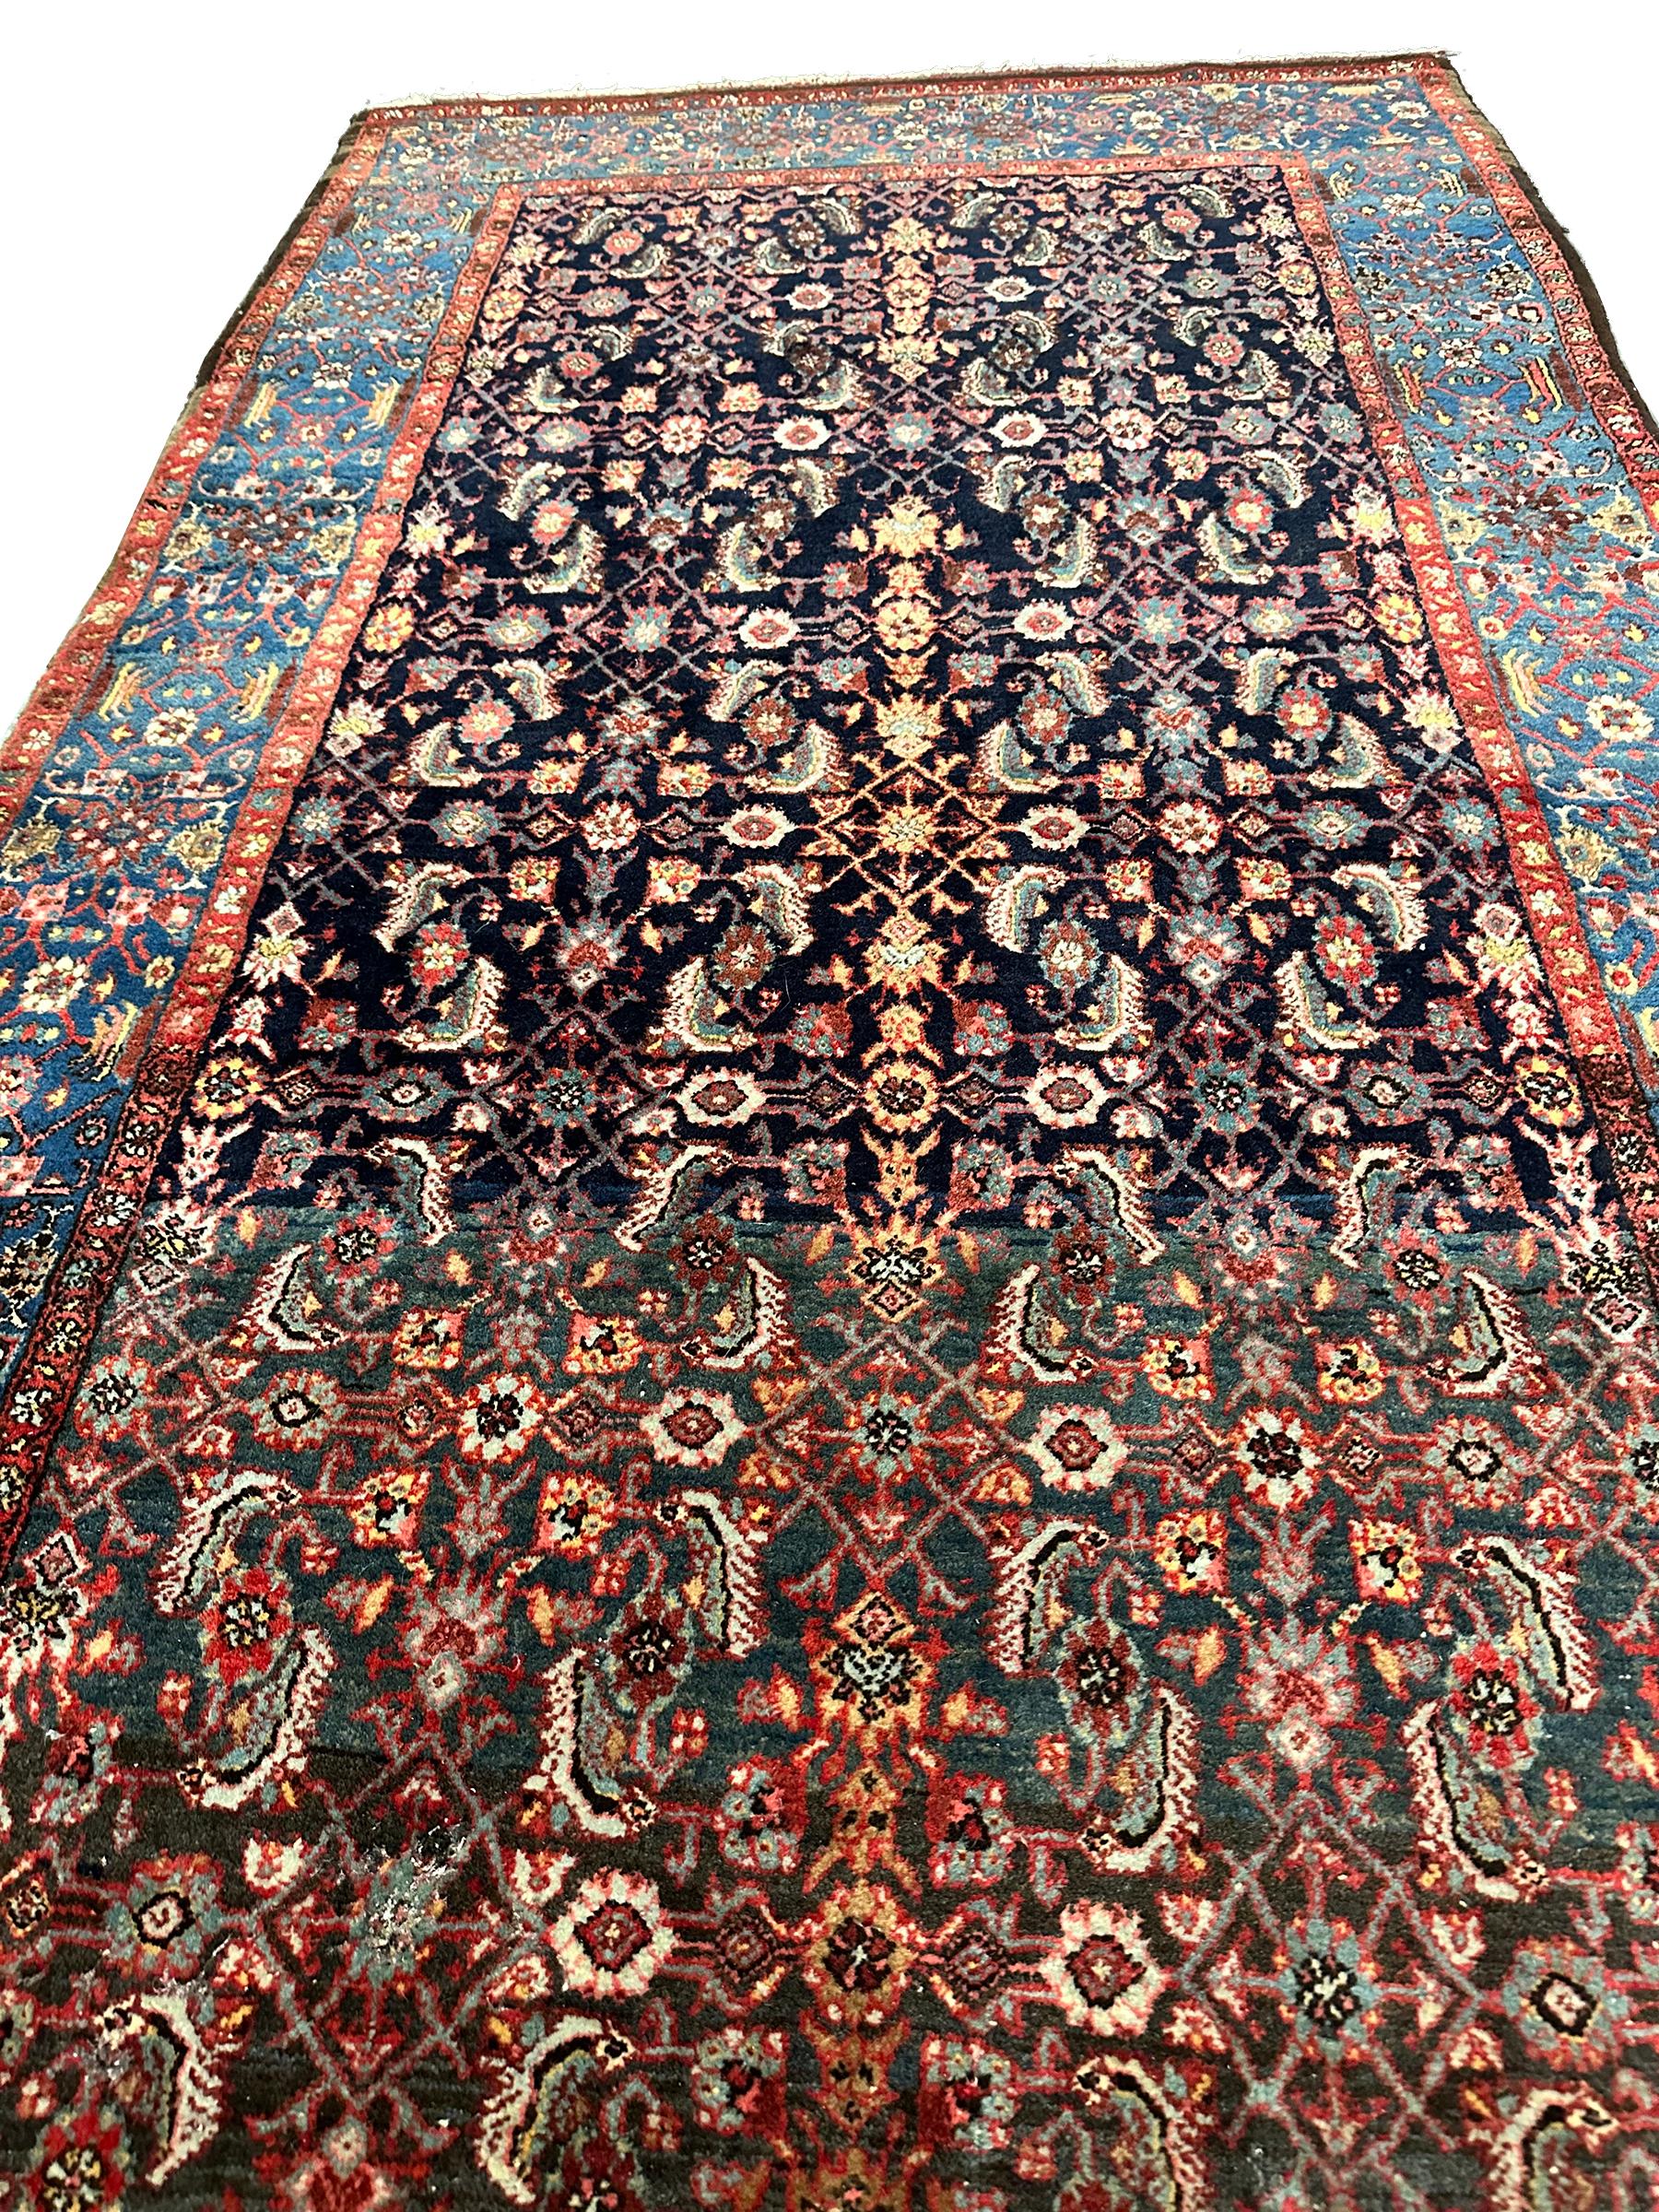 1900 Antique Bijjarr Rug geometric overall Black 4x8 127cm x 239cm In Good Condition For Sale In New York, NY